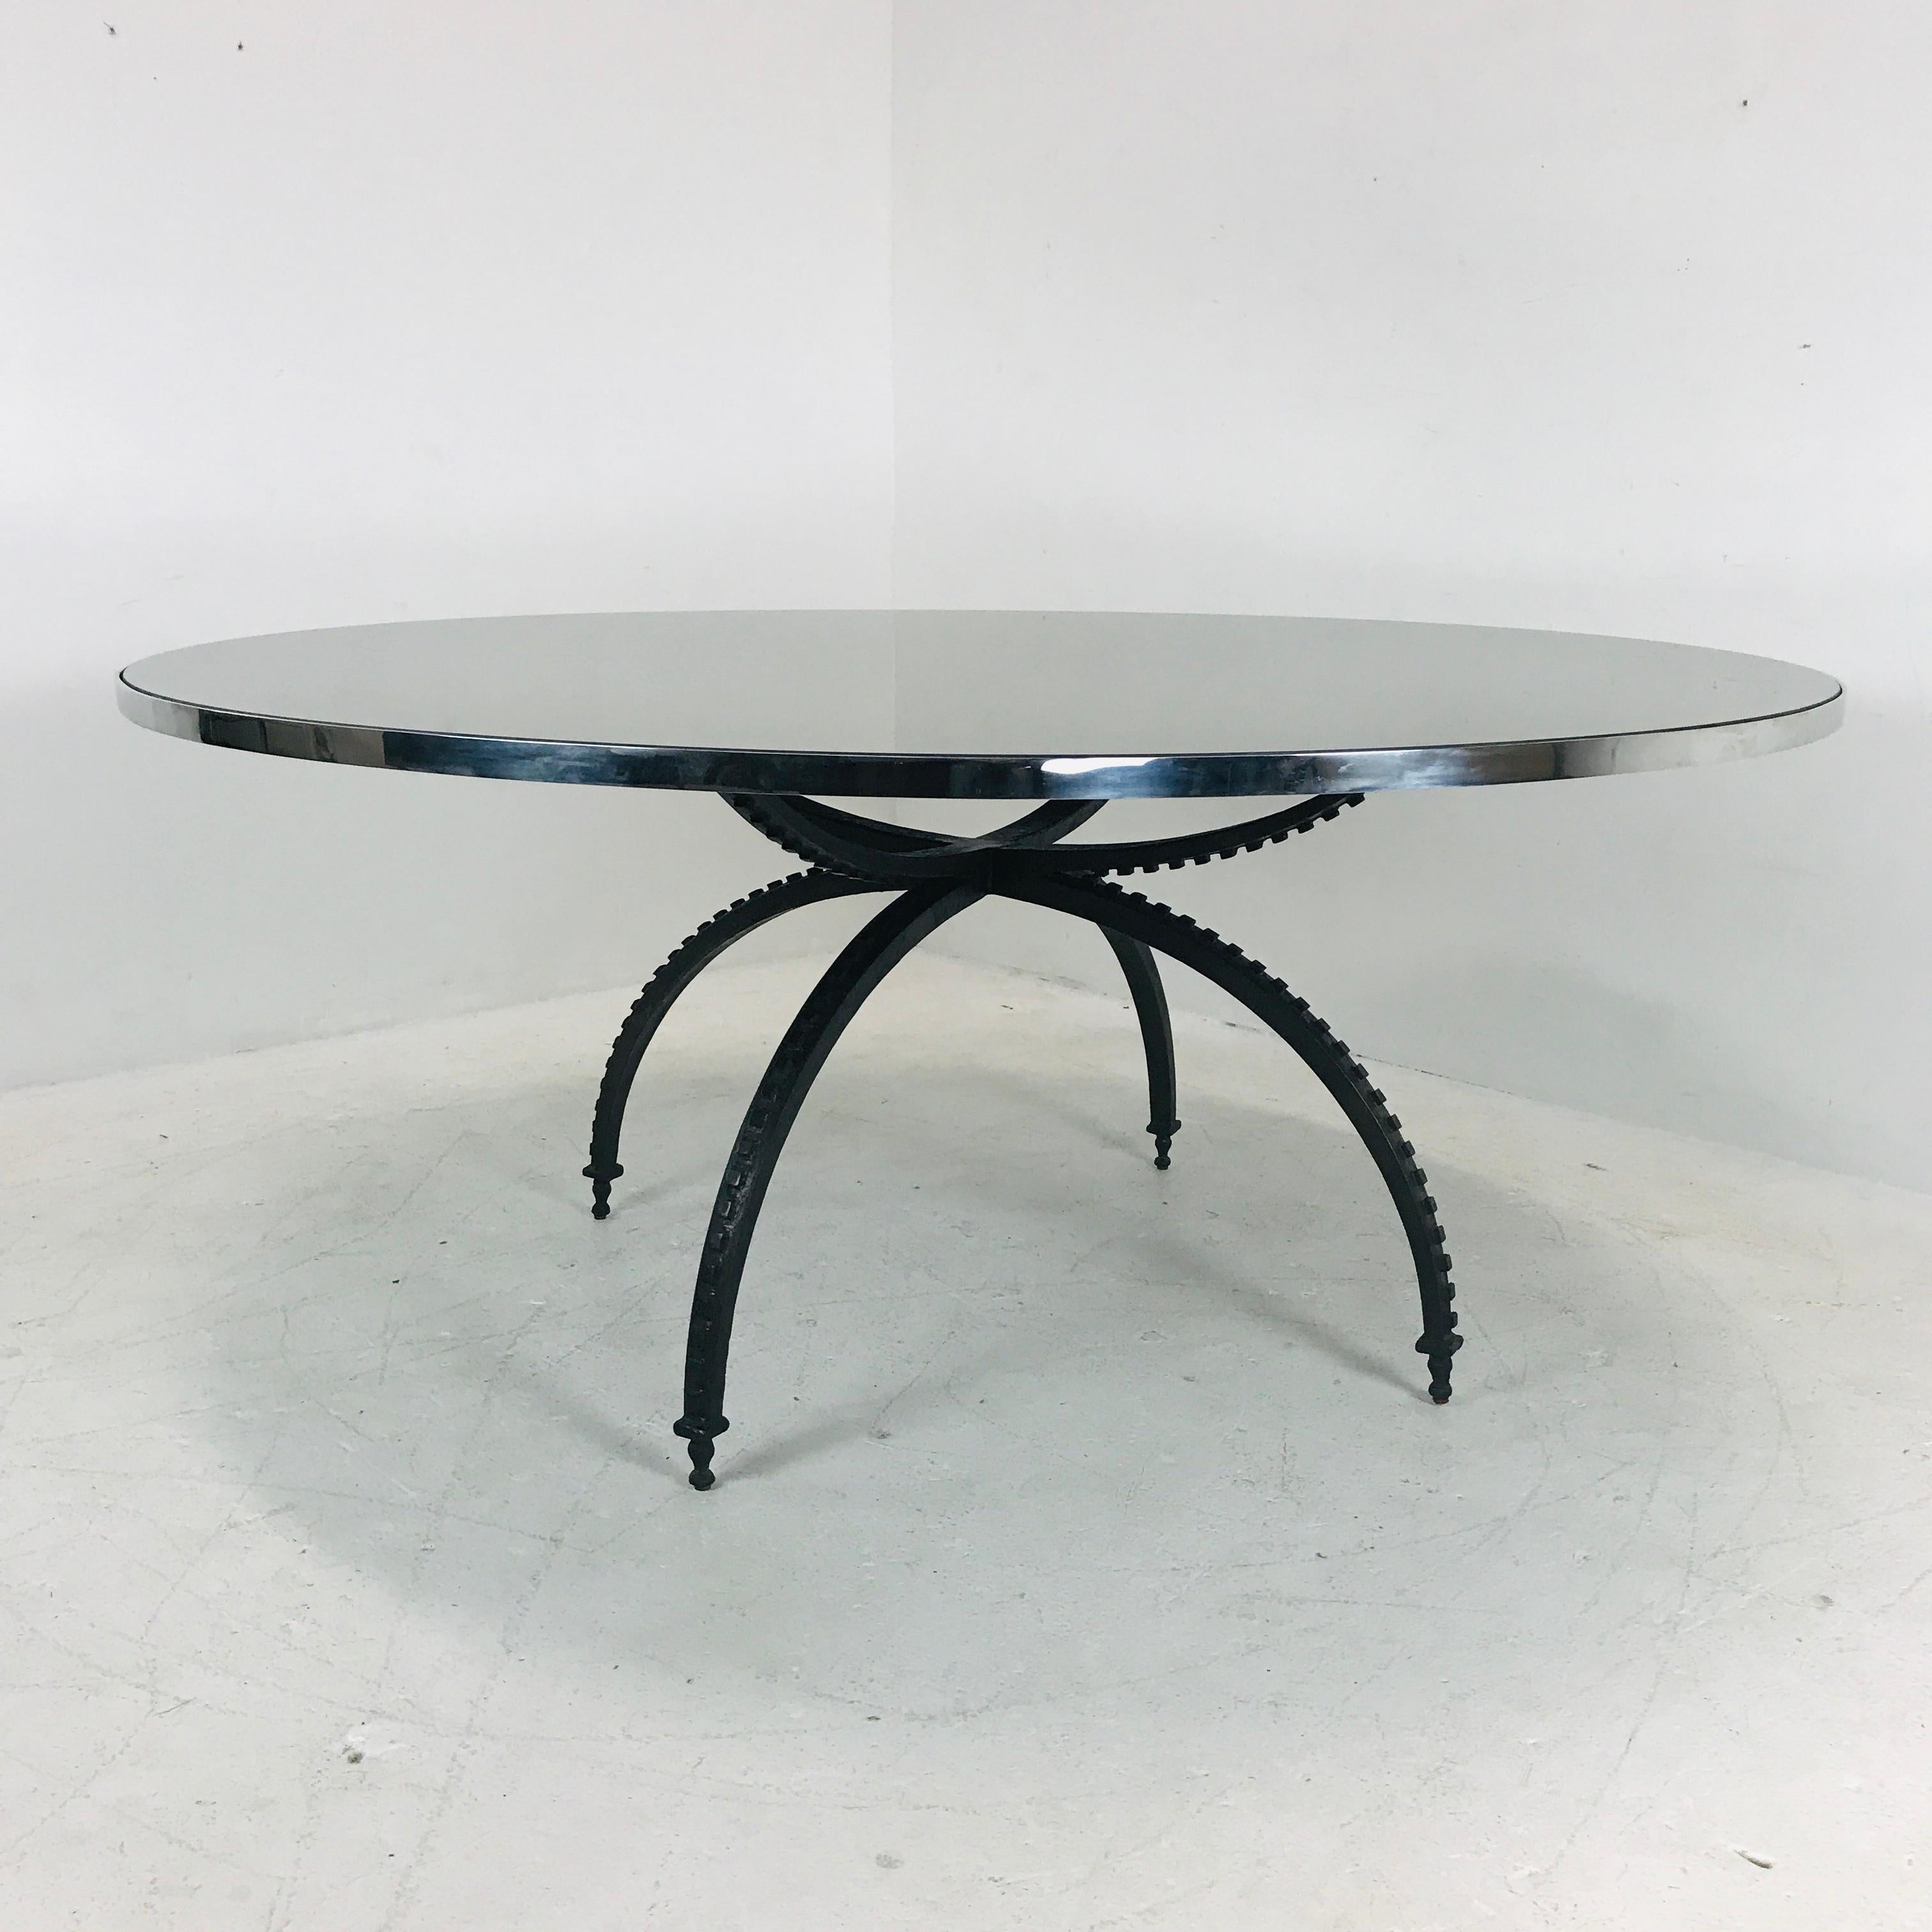 Four solid metal legs make up the base of this gorgeous, large round Baker dining table. Bronze mirror top measures 70